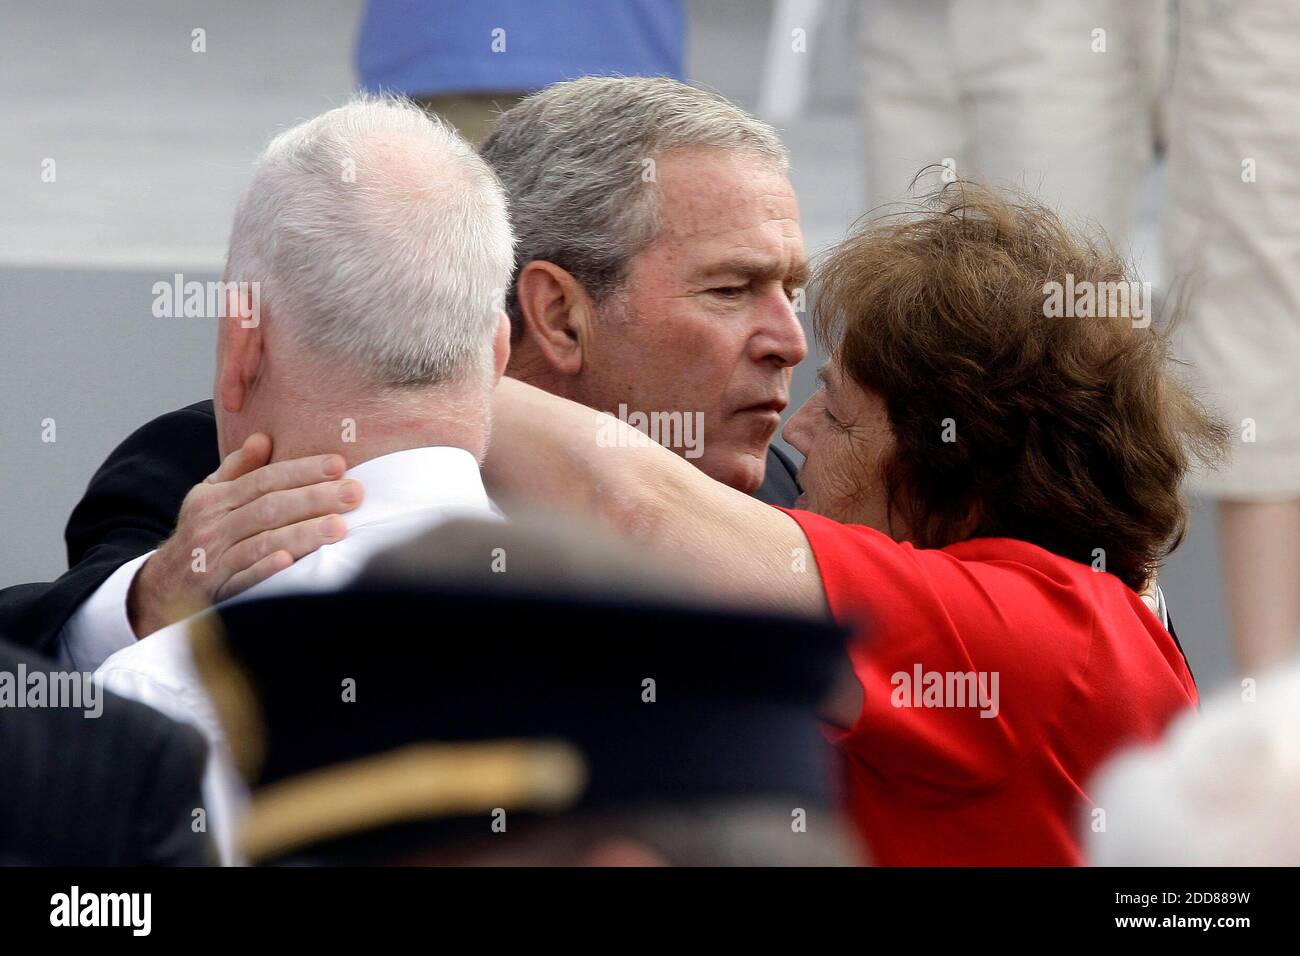 NO FILM, NO VIDEO, NO TV, NO DOCUMENTARY - President George W. Bush hugs people in the audience during the Pentagon ceremony marking the seventh anniversary of the attacks of September 2001, on September 11, 2008. Photo by Chuck Kennedy/MCT/ABACAPRESS.COM Stock Photo